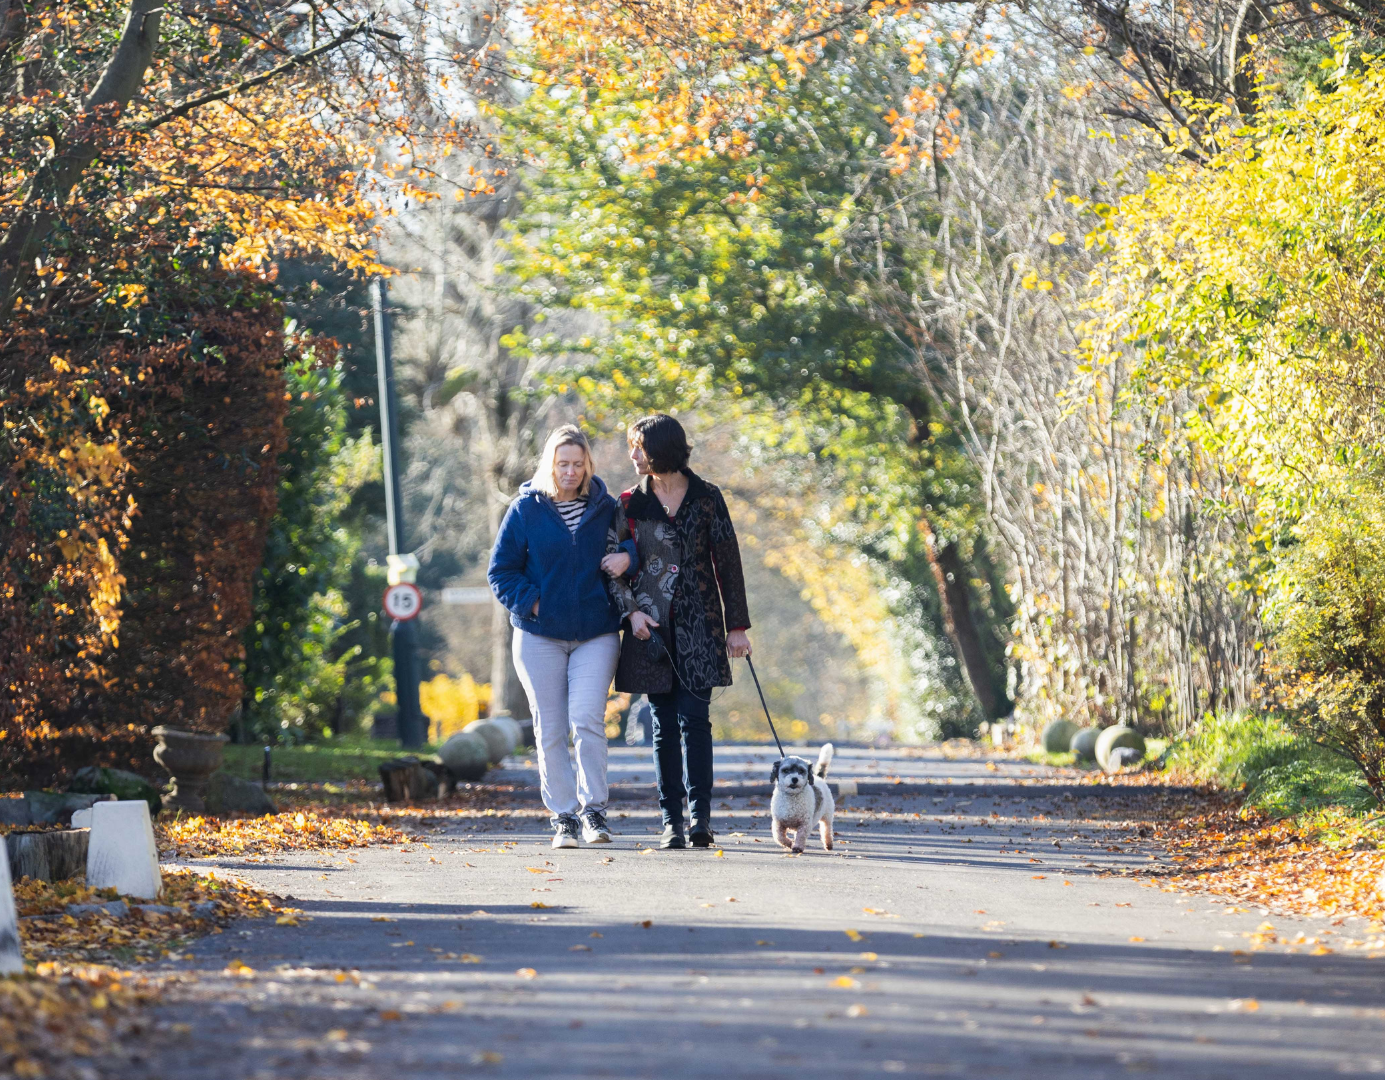 Two ladies walking down road with a dog